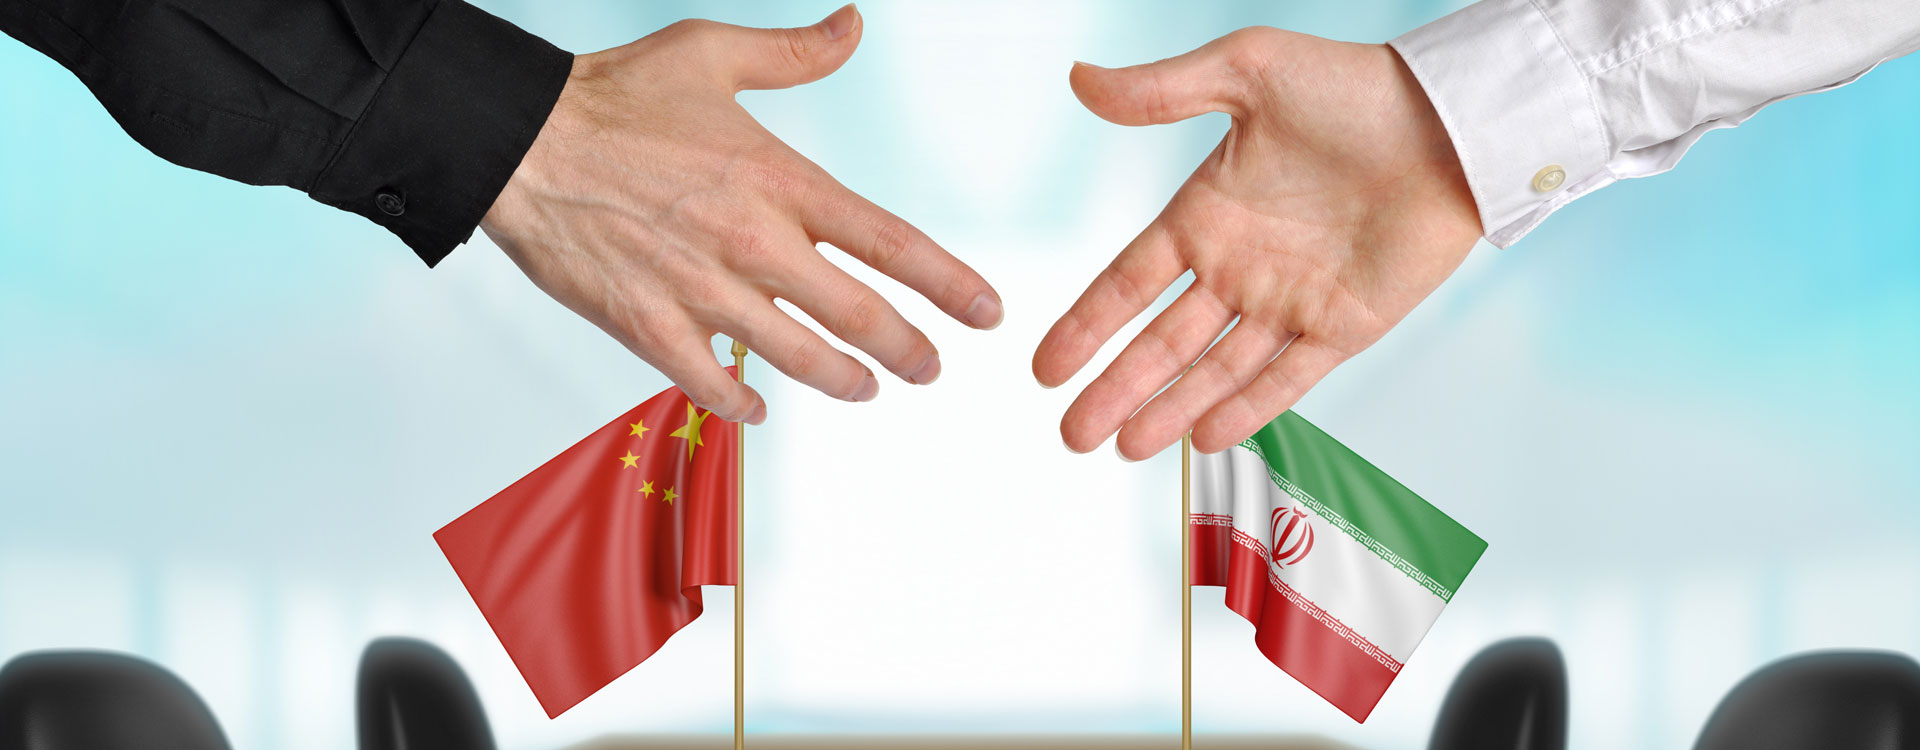 shaking hands and Iran and China flags